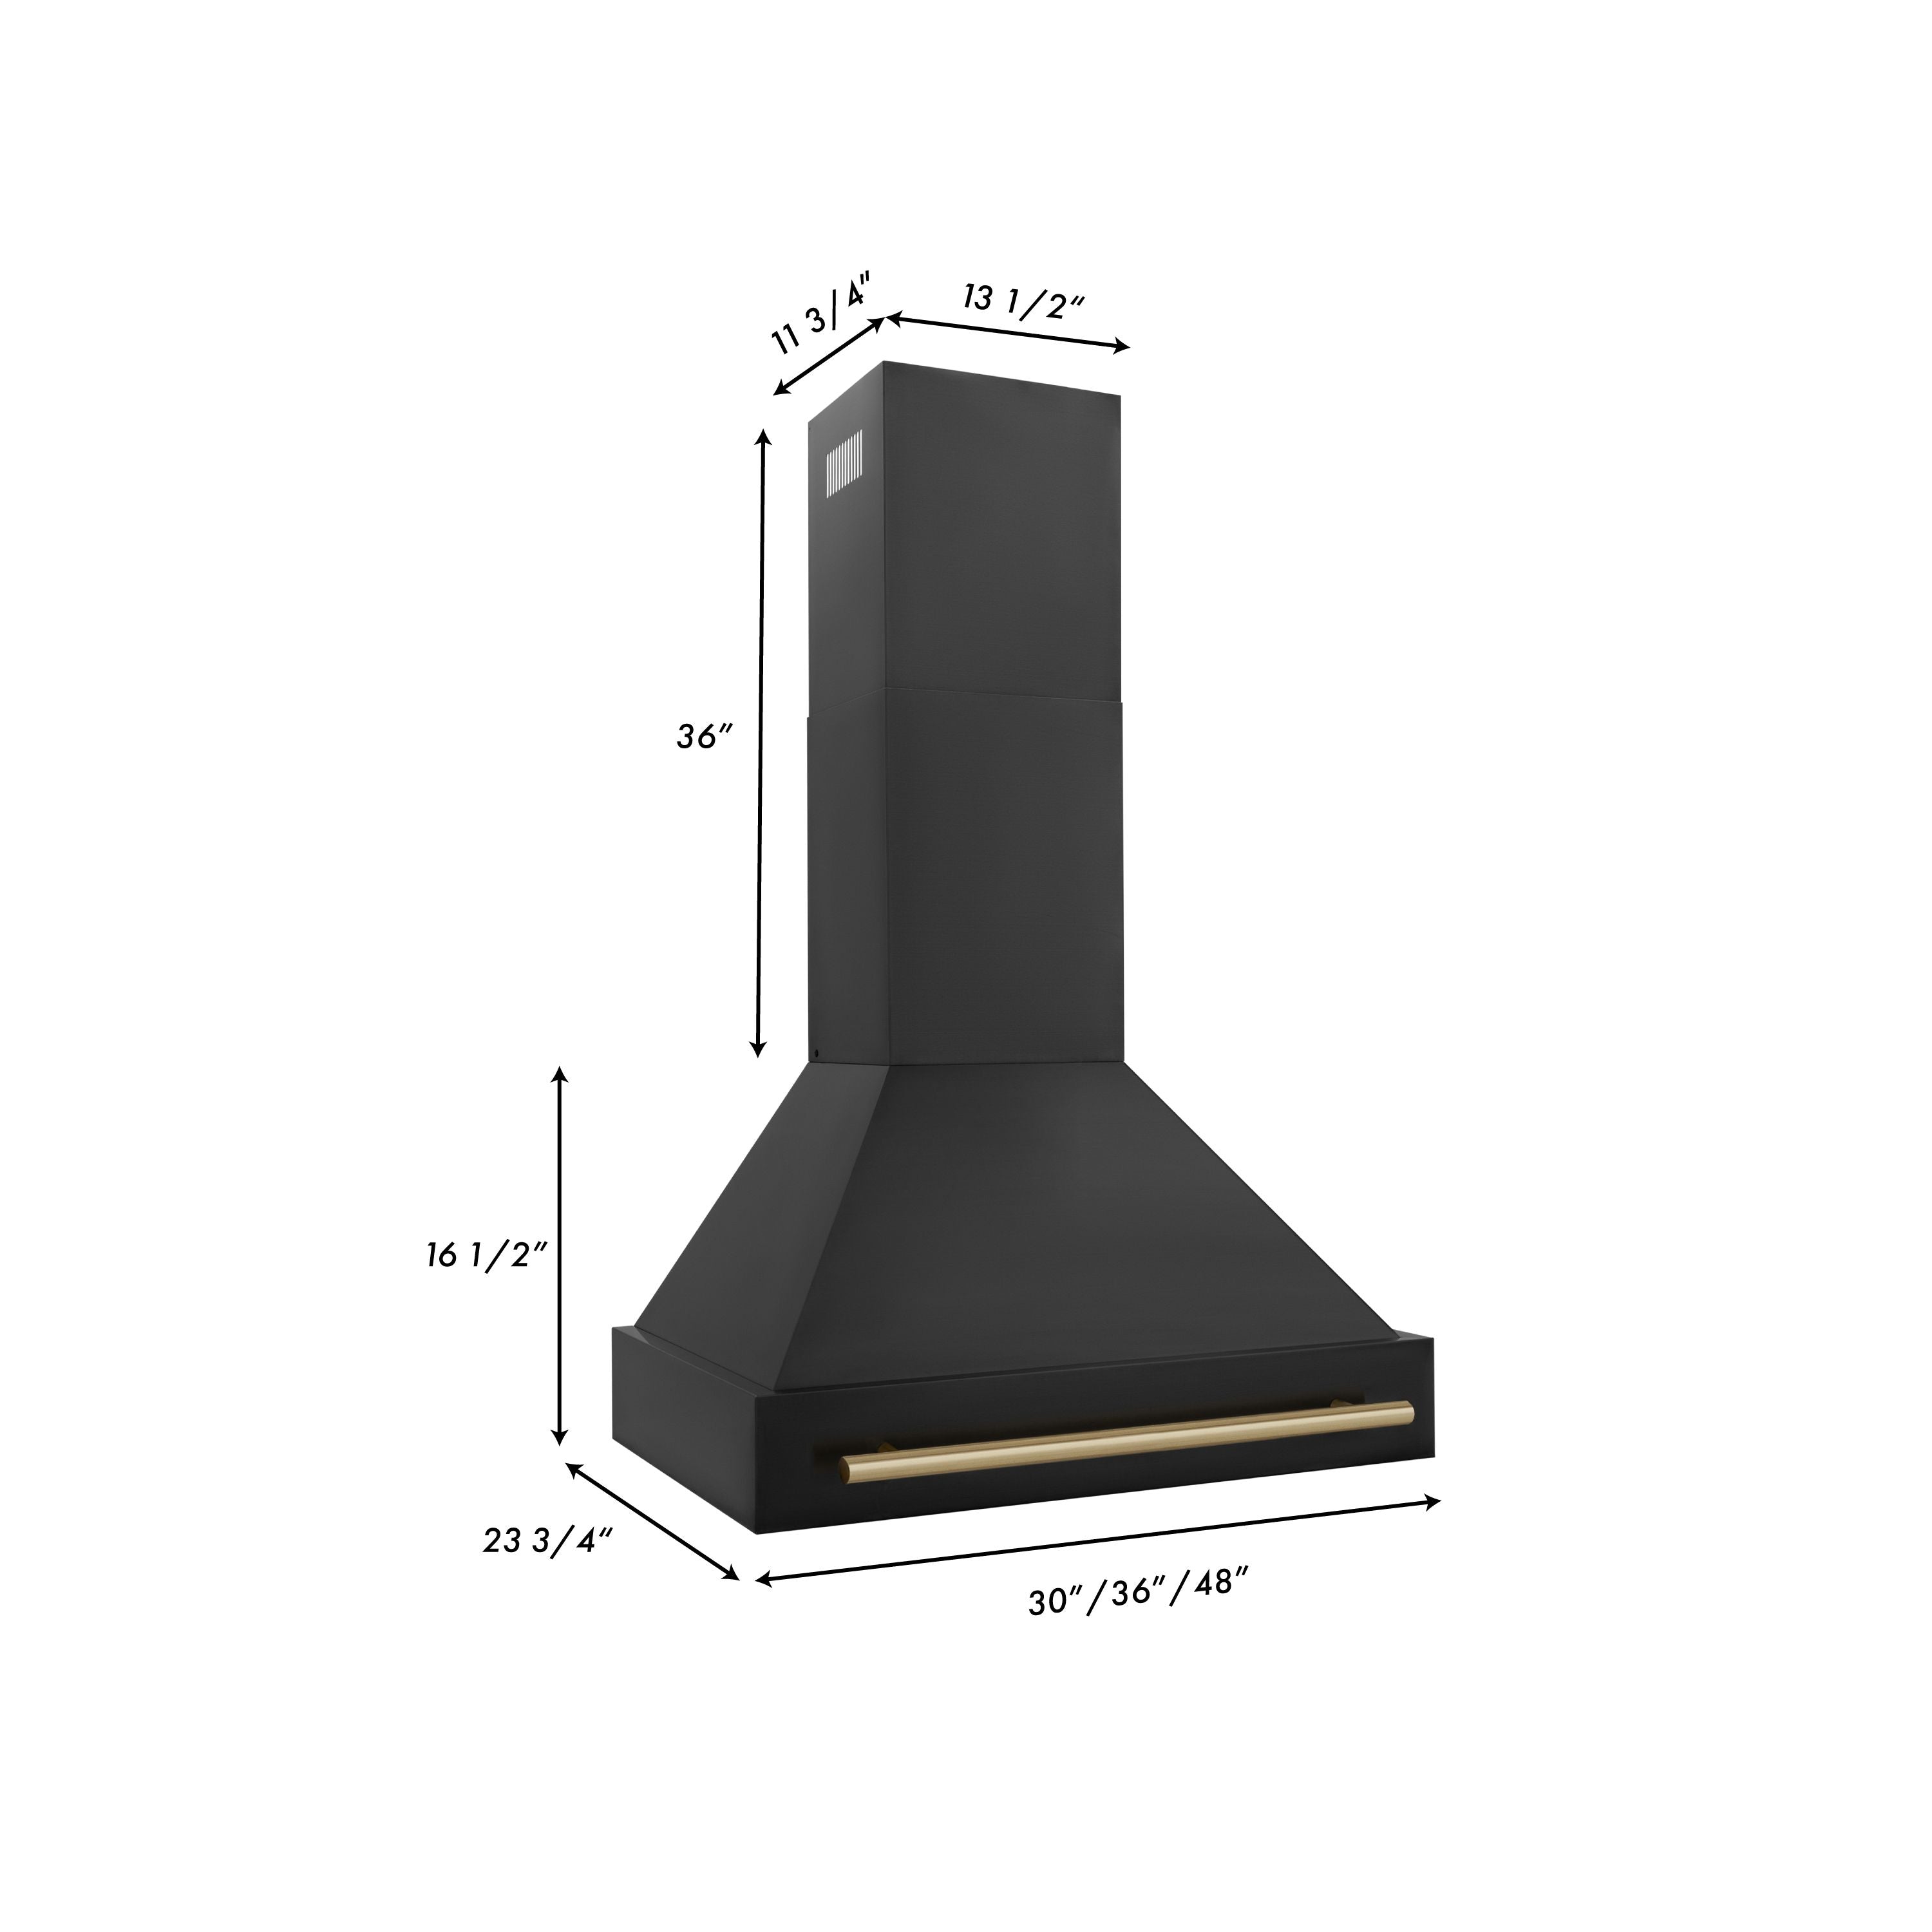 ZLINE 30 in. Autograph Edition in Black Stainless Steel Range Hood with Champagne Bronze Handle, BS655Z-30-CB